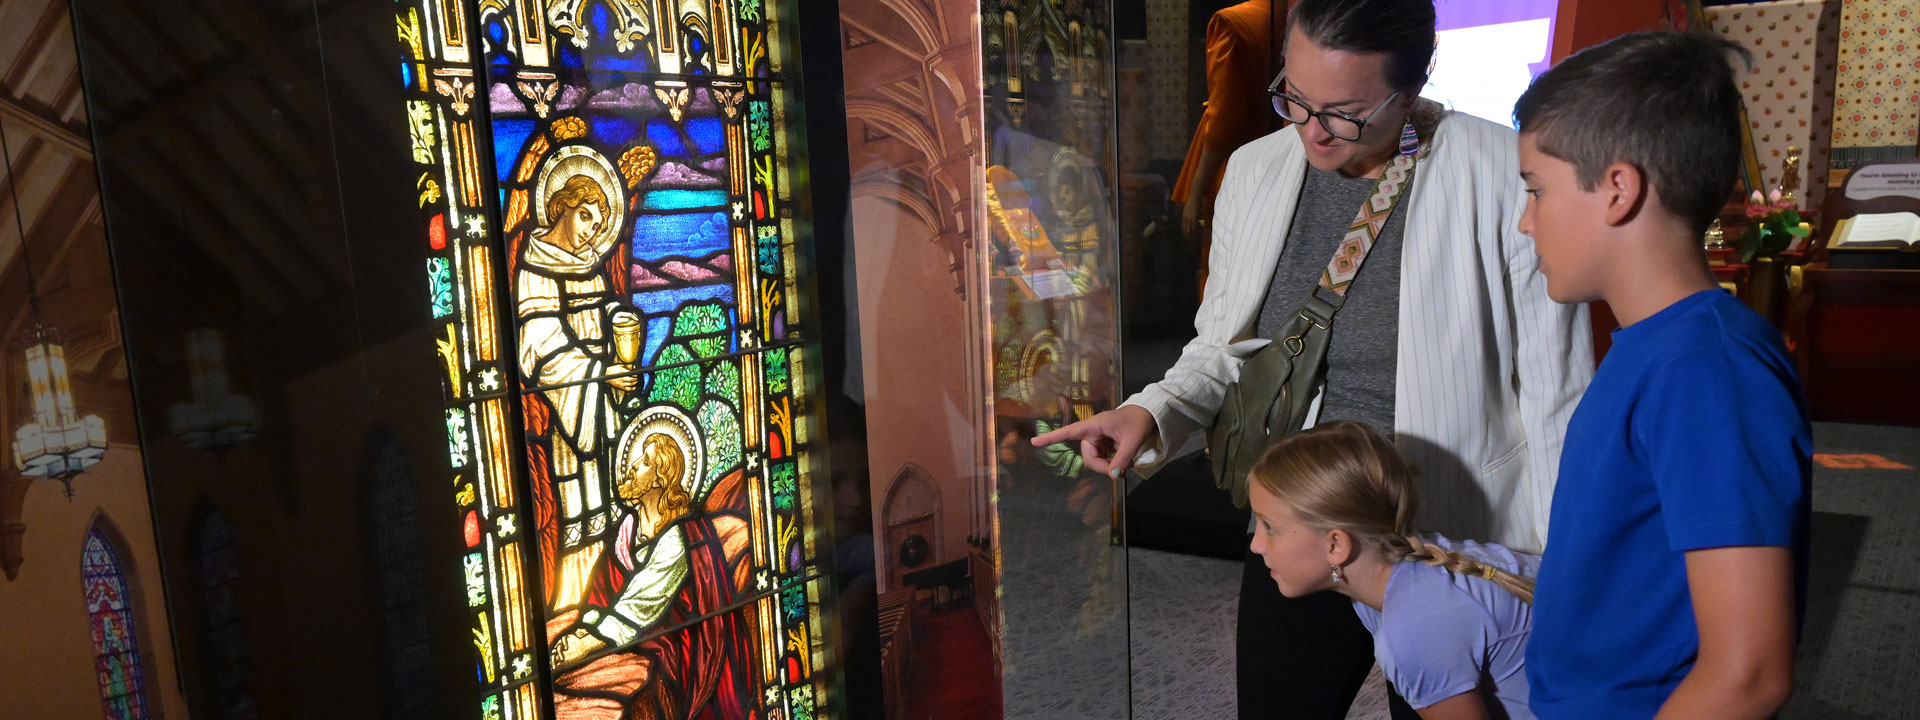 Family examining a stained glass window in the Sacred Places exhibit.